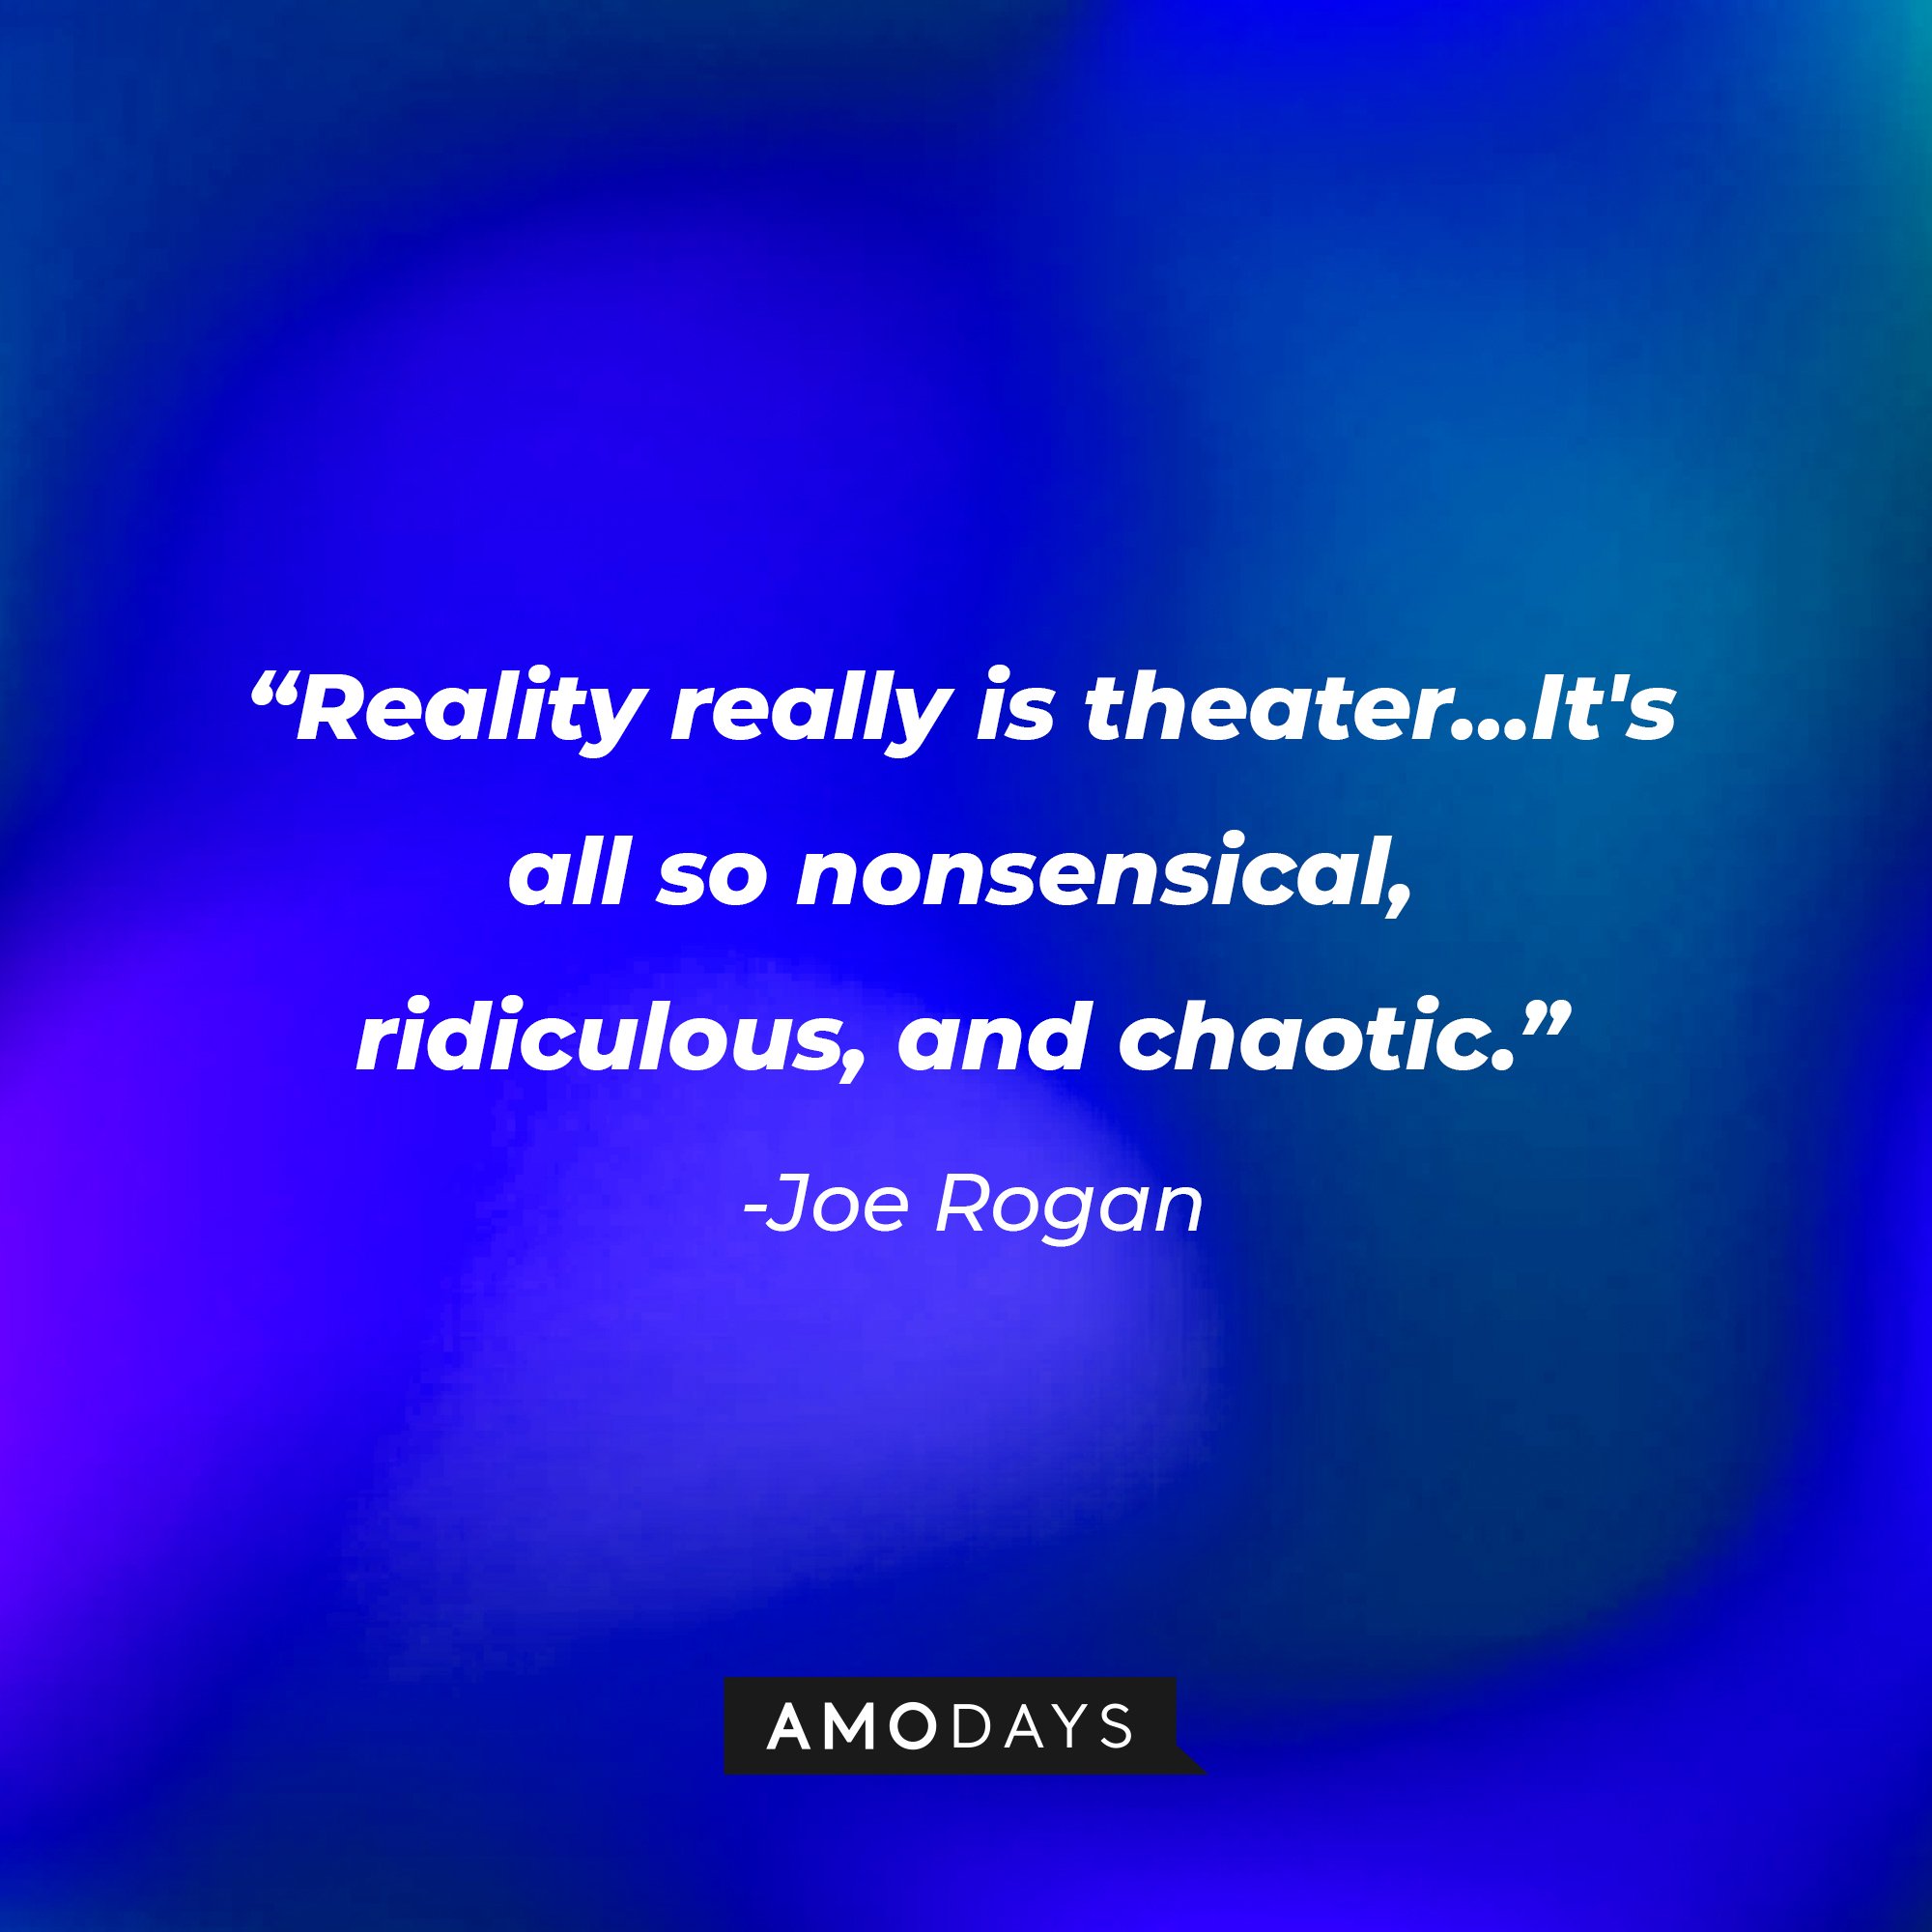 Joe Rogan's quote: "Reality really is theater…It's all so nonsensical, ridiculous, and chaotic." | Image: AmoDays